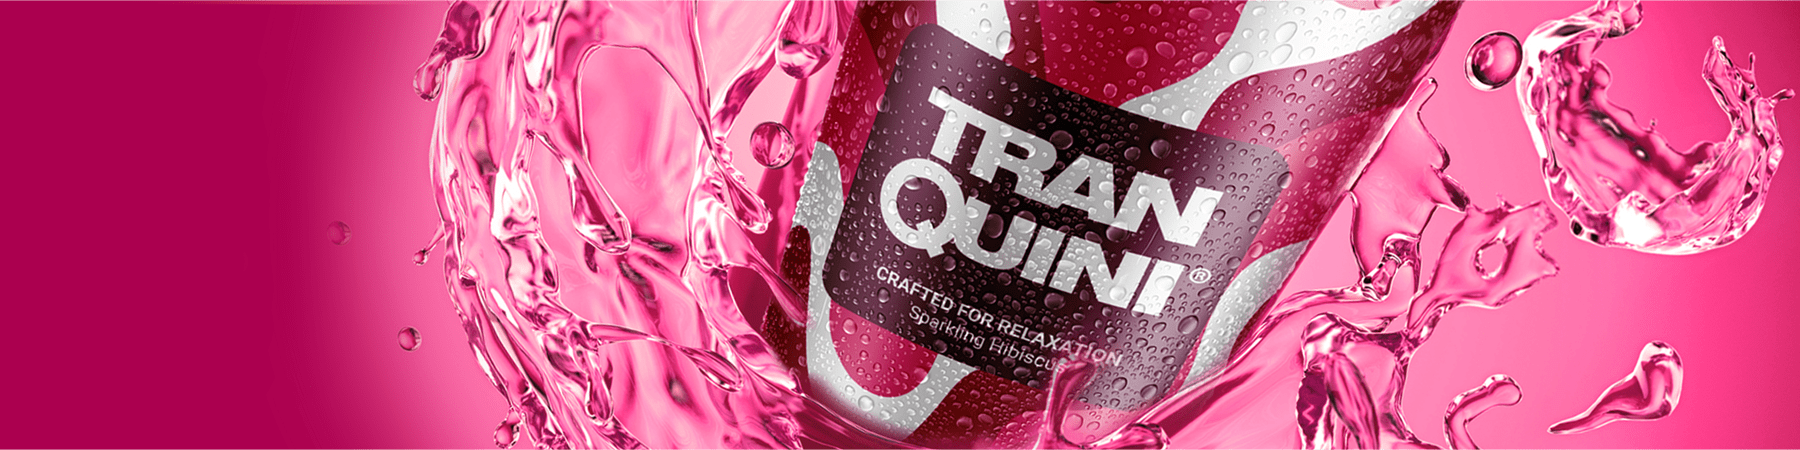 A can of Tranquini beverage splashes through vibrant pink liquid against a pink background. The predominantly silver can boasts a pink and white label that reads "Tranquini." Droplets of the hibiscus-hued liquid surround the can, emphasizing its refreshing nature.